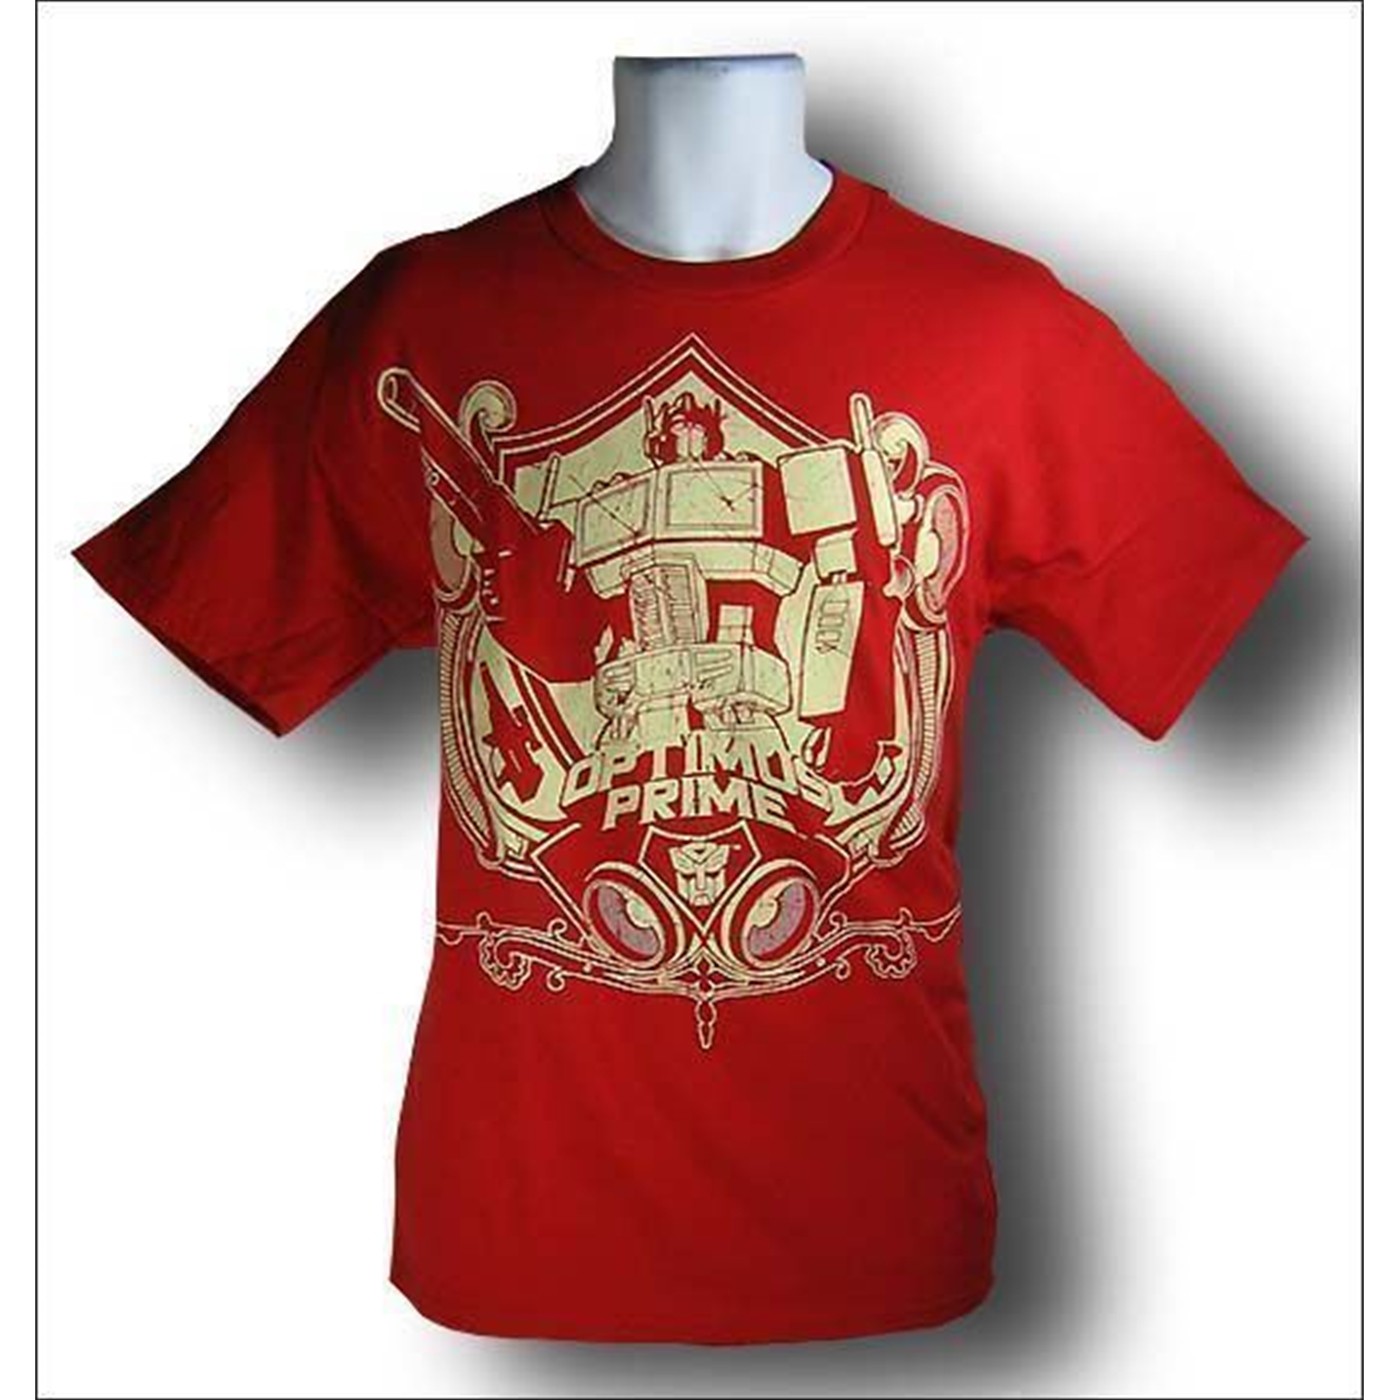 Transformers Red Obey Optimus Prime T-Shirt